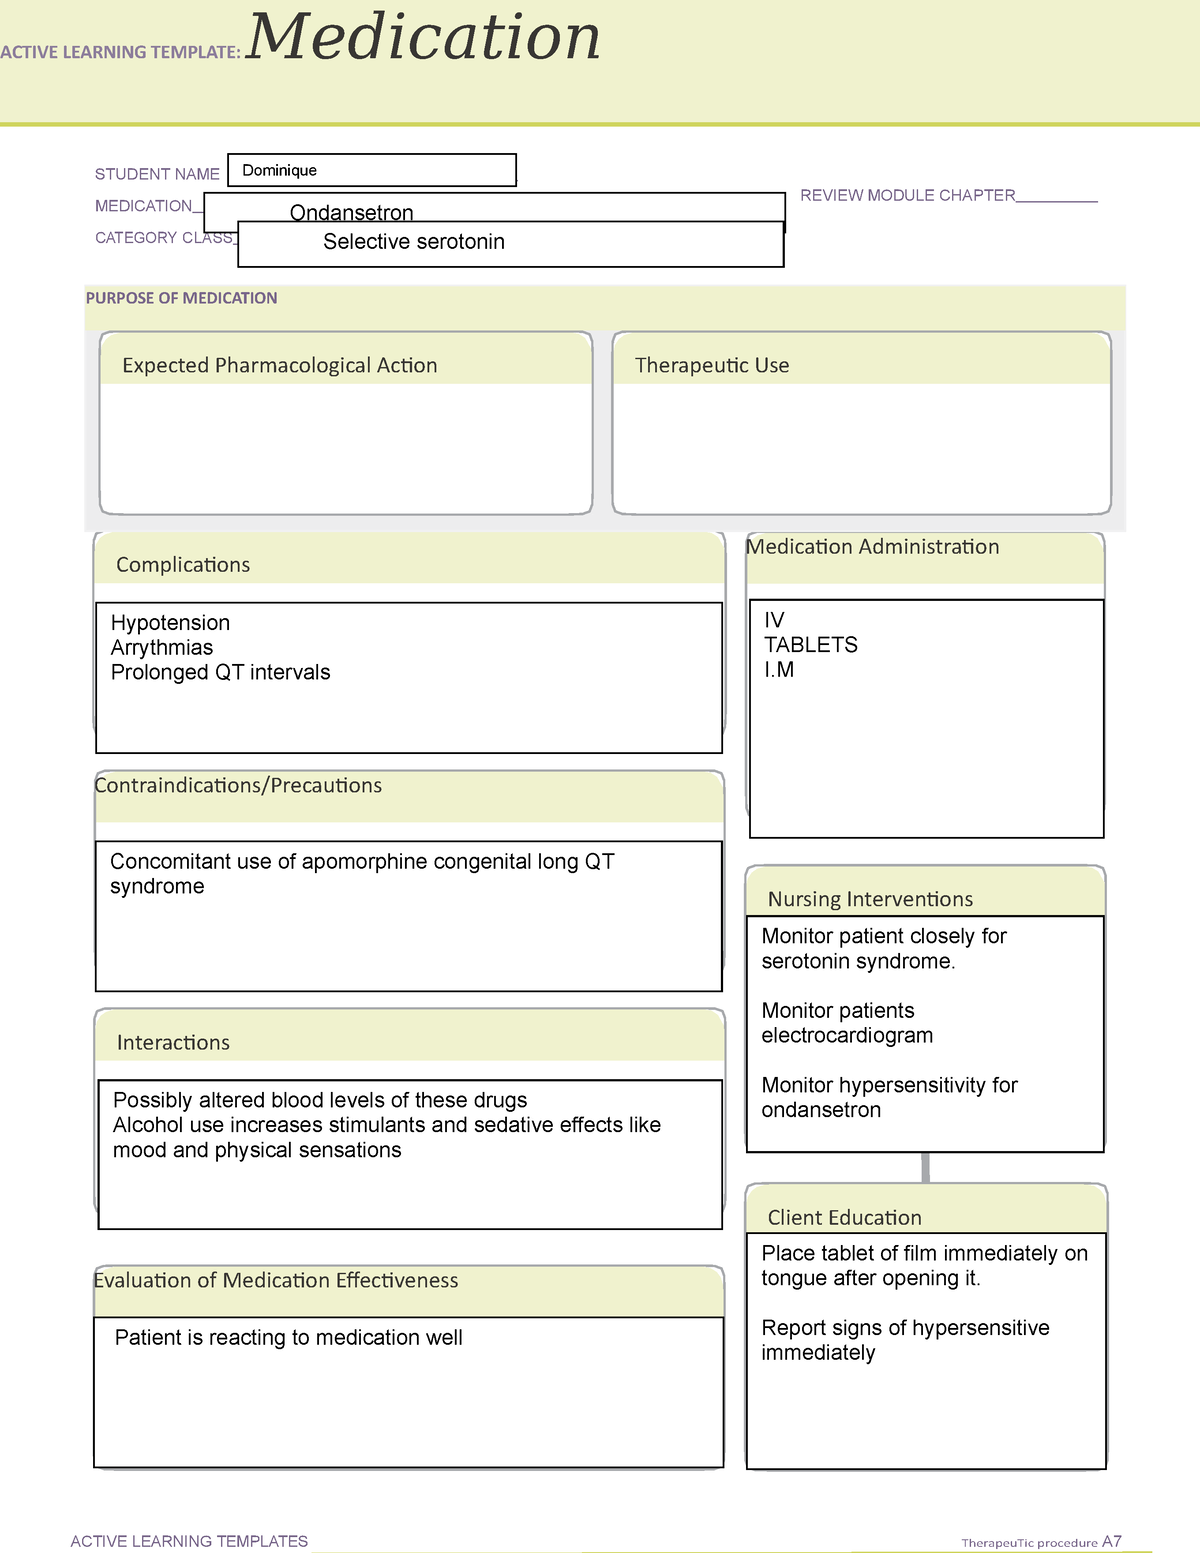 ATI Medication Template ondansetron ACTIVE LEARNING TEMPLATE